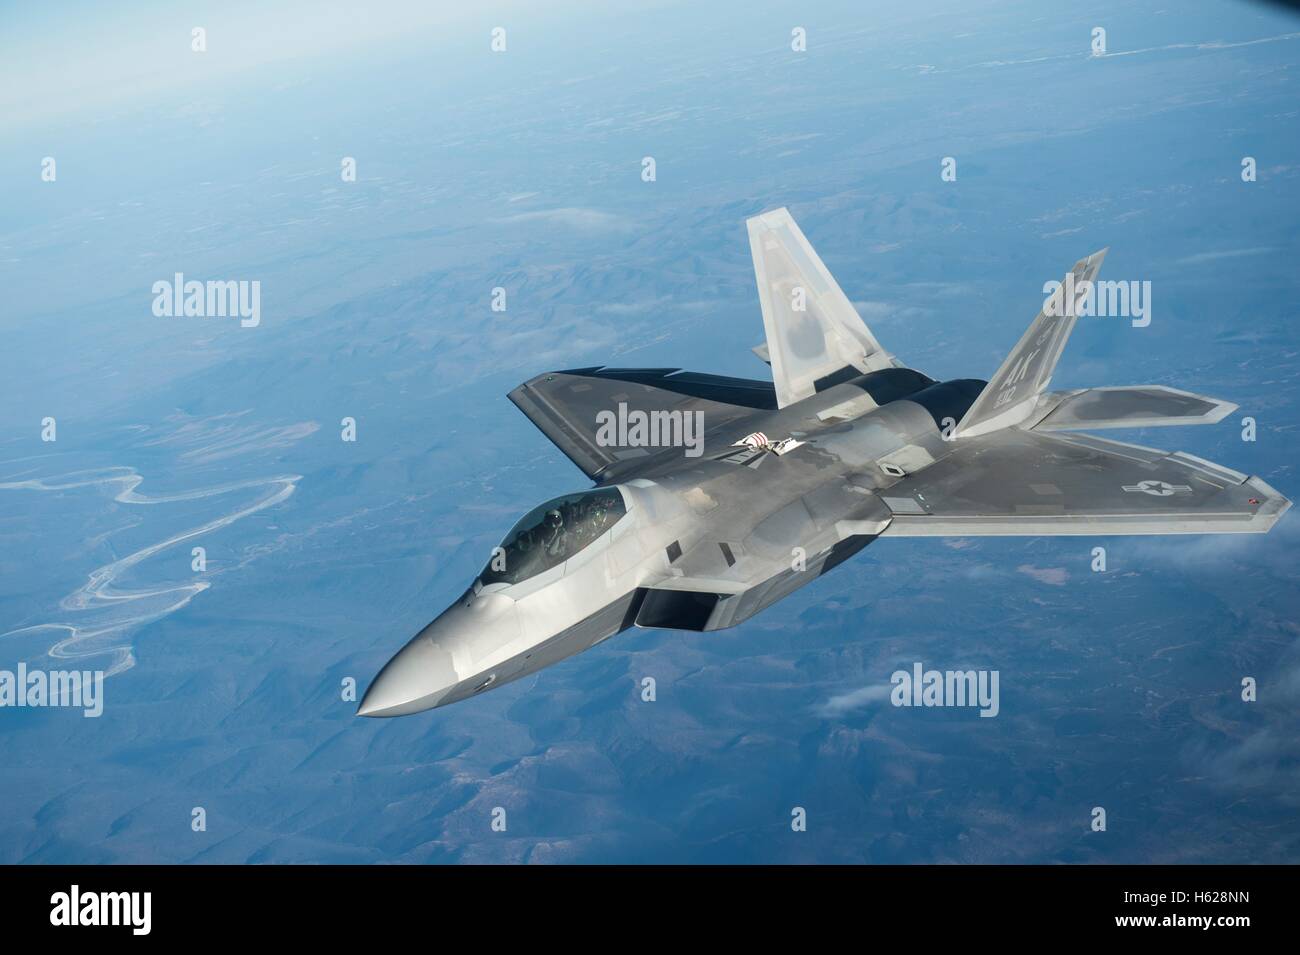 An U.S Air Force F-22 Raptor aircraft in flight during the NORAD Vigilant Shield 17 training exercise at Joint Base Elmendorf-Richardson October 17, 2016 in Anchorage, Alaska. Stock Photo